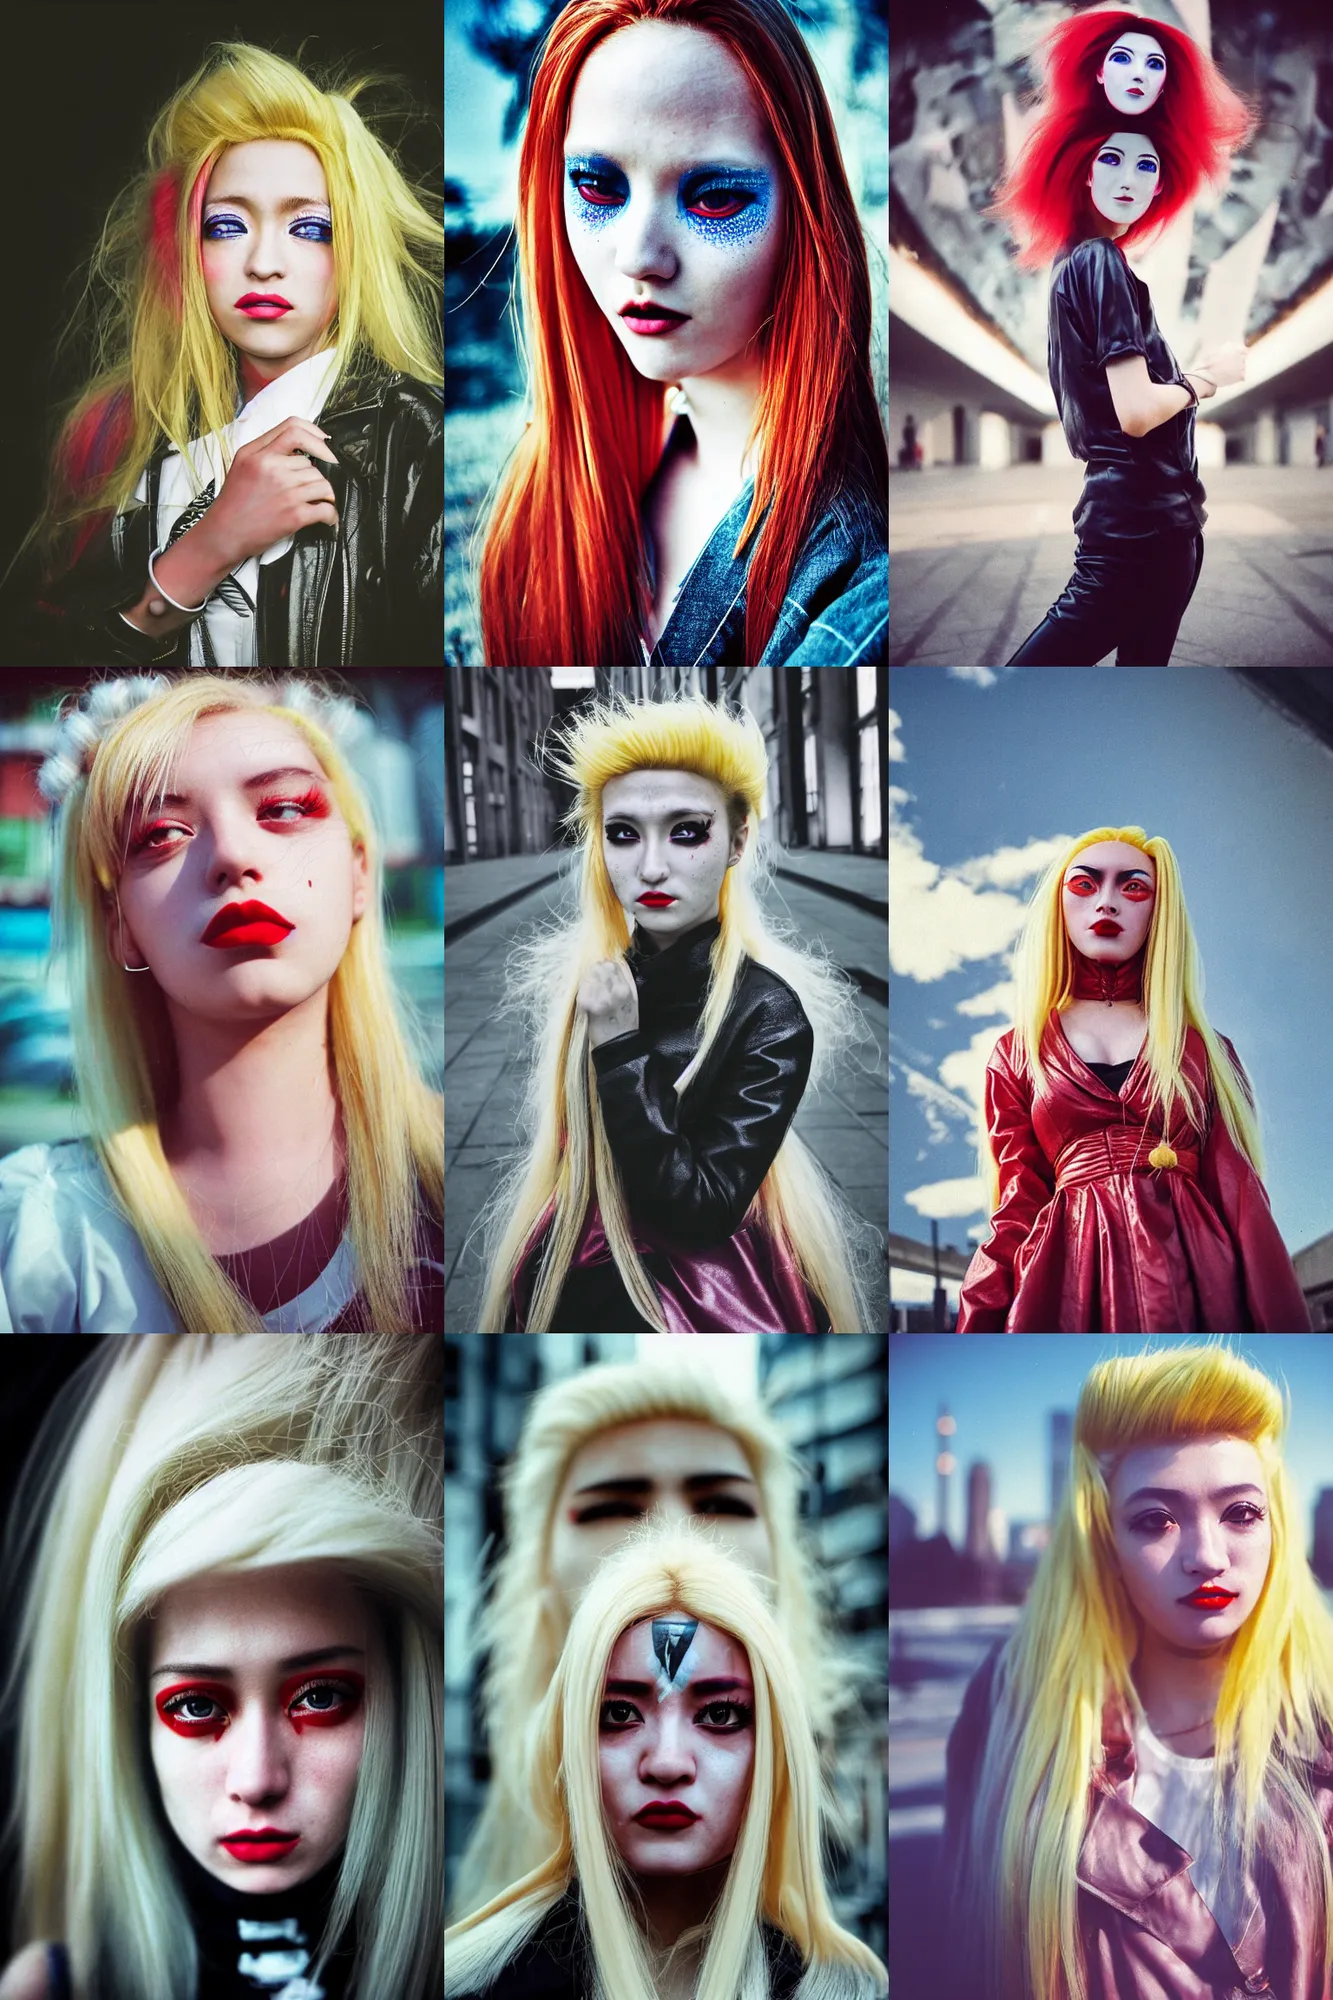 Prompt: Kodak Portra 400,8K,highly detailed: beautiful three point perspective extreme closeup portrait photo in style of chiaroscuro style 1990s frontiers in cosplay berlin seinen manga street photography fashion edition, tilt shift zaha hadid style berlin background, highly detailed, focus on model;Amaterasu style vaporwave ;blonde hair;pursed lips;blue eyes;tendu pose, clear eyes, soft lighting